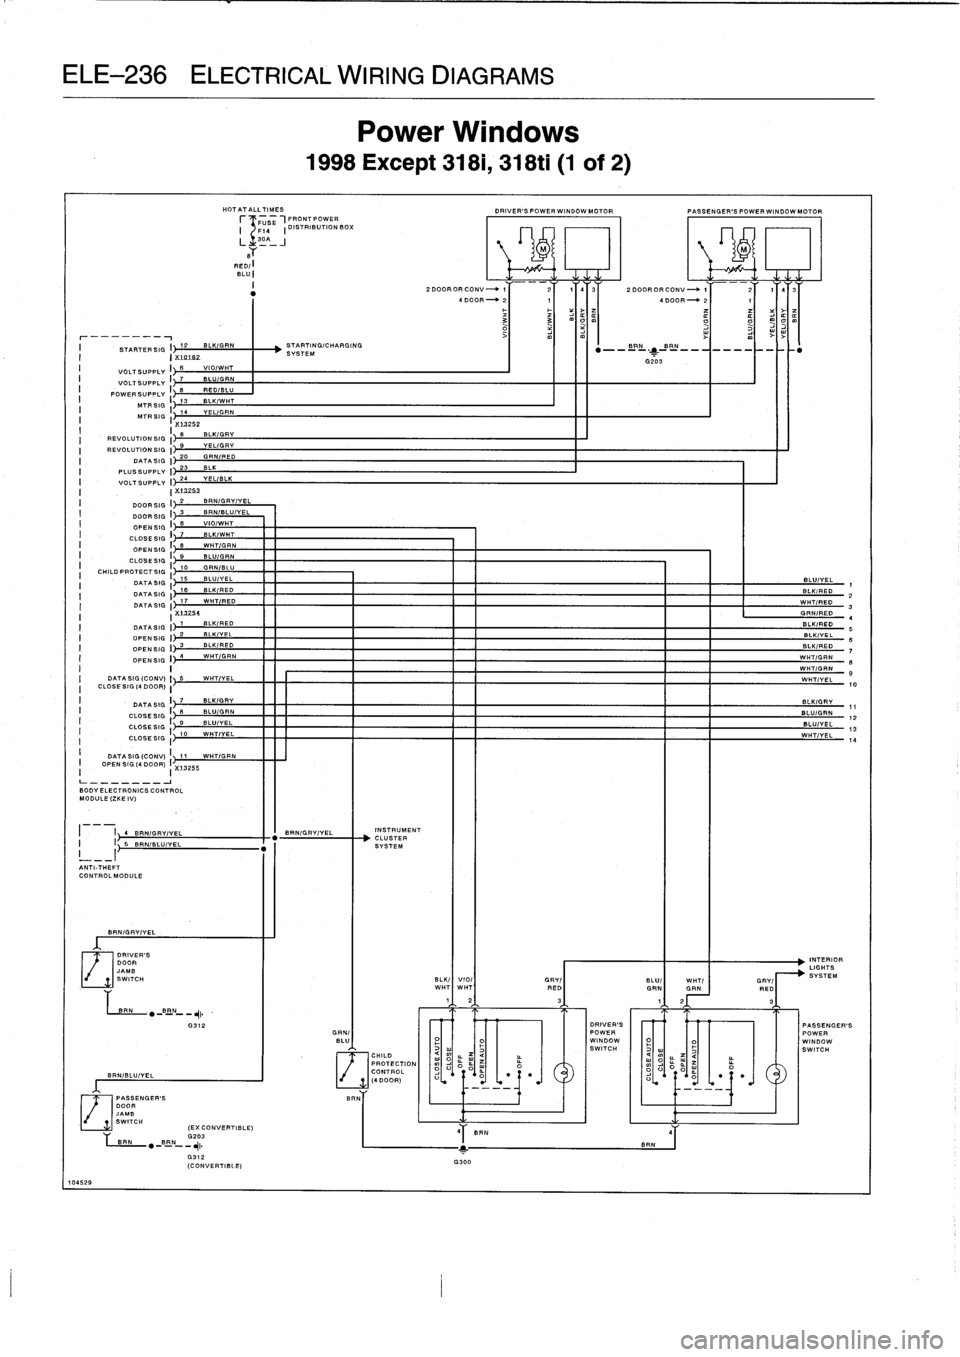 BMW 318i 1998 E36 Repair Manual 
ELE-236
ELECTRICAL
WIRING
DIAGRAMS

HOTATALLTIMES
f
-
-T
USE
-1FRONTPOWER
F14

	

I
DISTRIBUTION
BOX

RED/
:
BLU
:

I

	

STARTERSIG
I
12

	

BLKIGRN

	

STARTING/CHARGING
I

	

I
X
10182

	

SYSTEM
